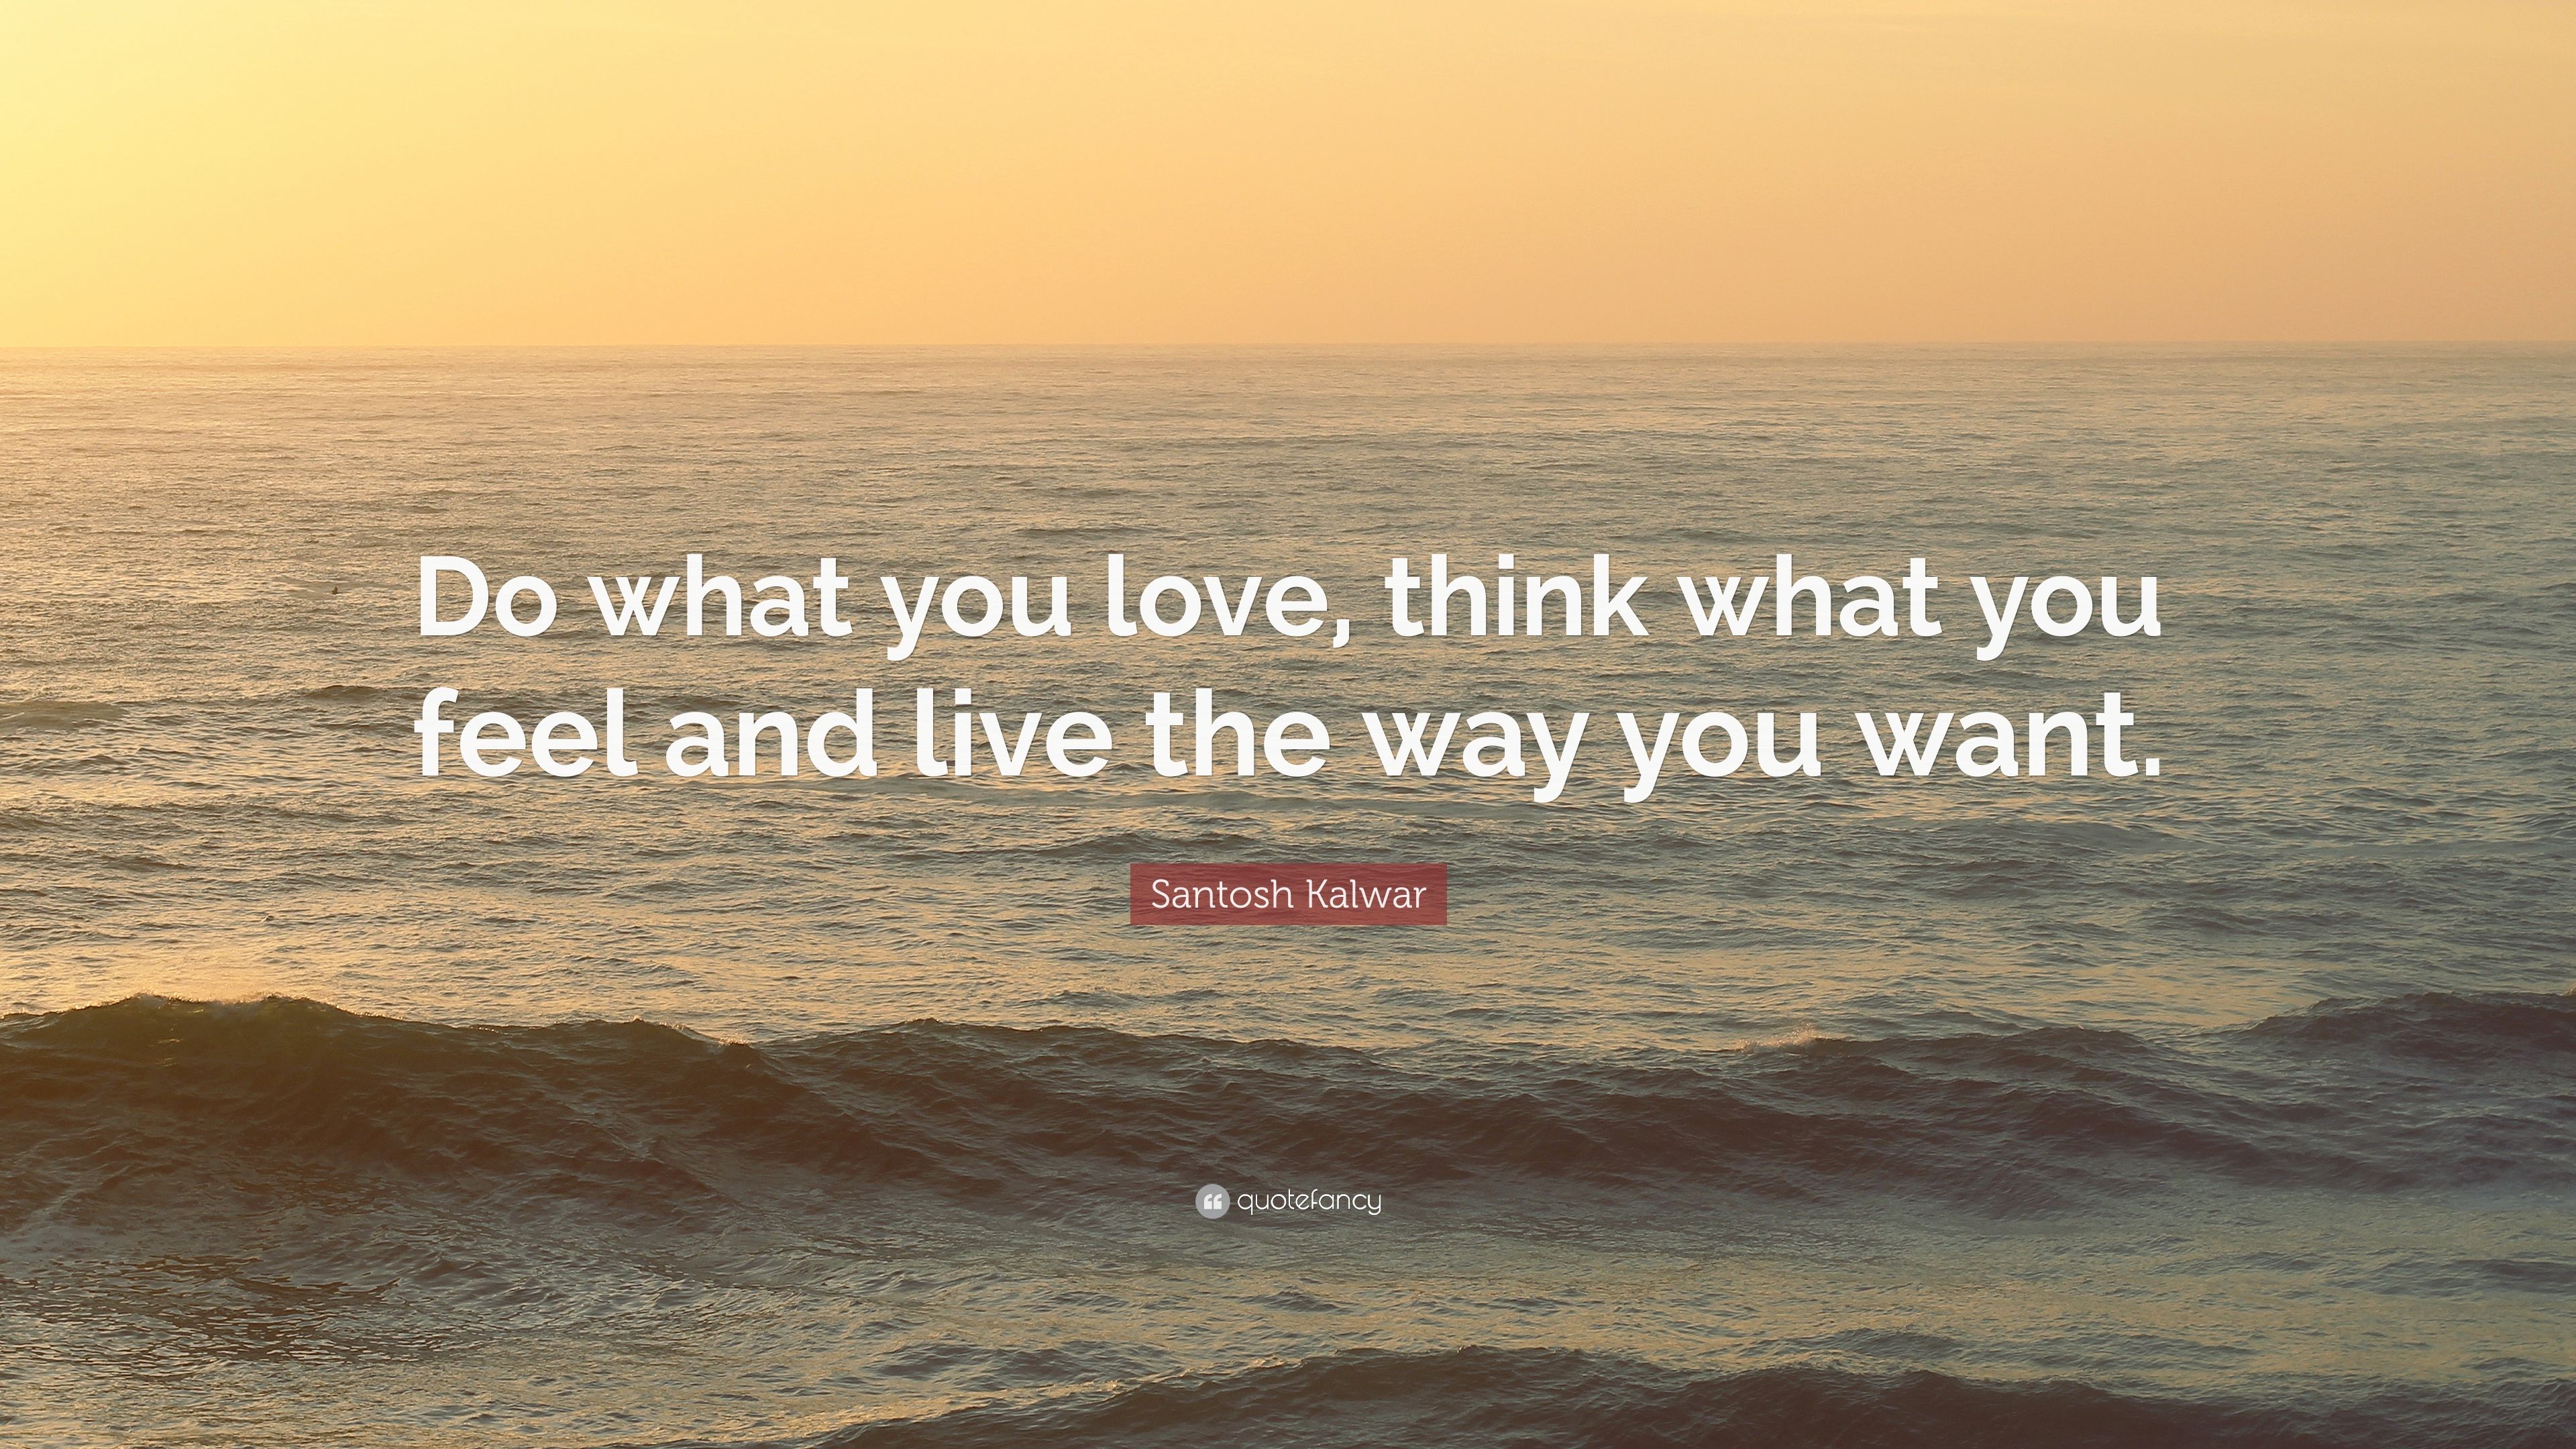 Santosh Kalwar Quote: “Do what you love, think what you feel and live the way you want.” (10 wallpaper)